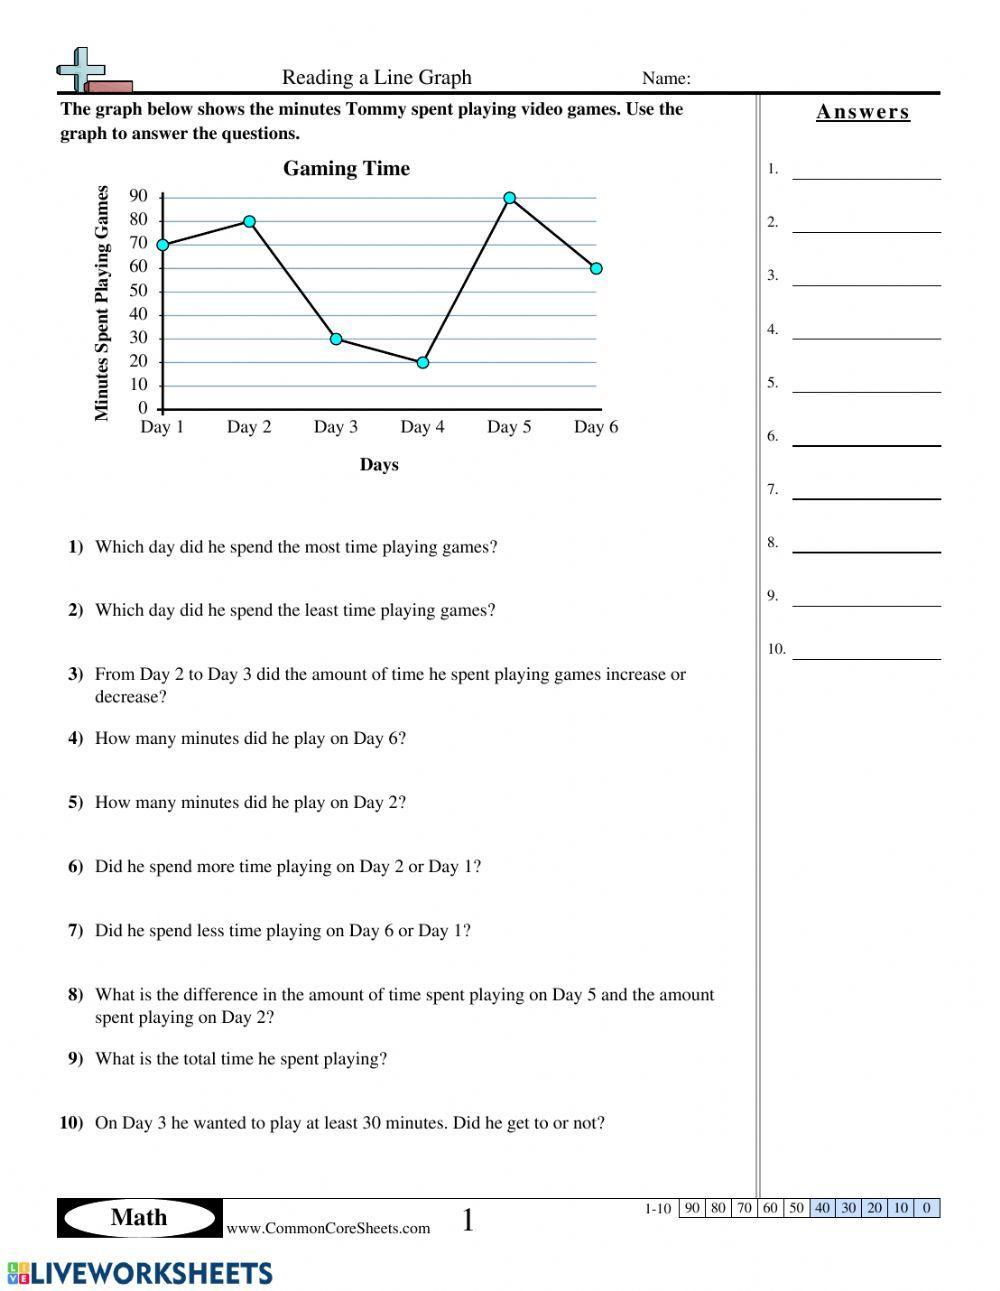 Reading a Line Graph-Gaming Time